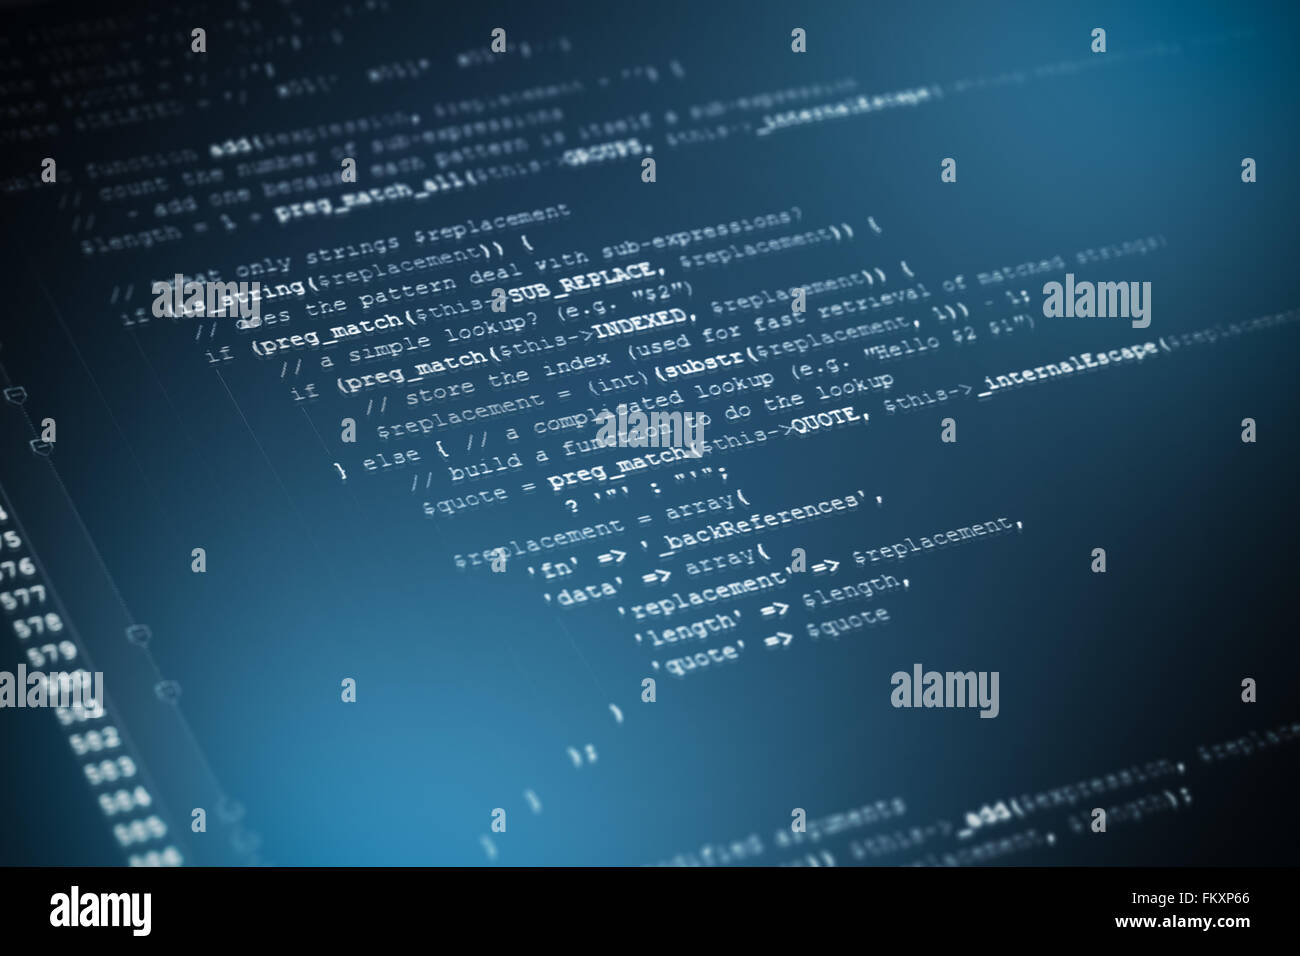 Desktop Source Code And Wallpaper By Computer Language With Coding And  Programming Stock Photo - Download Image Now - iStock